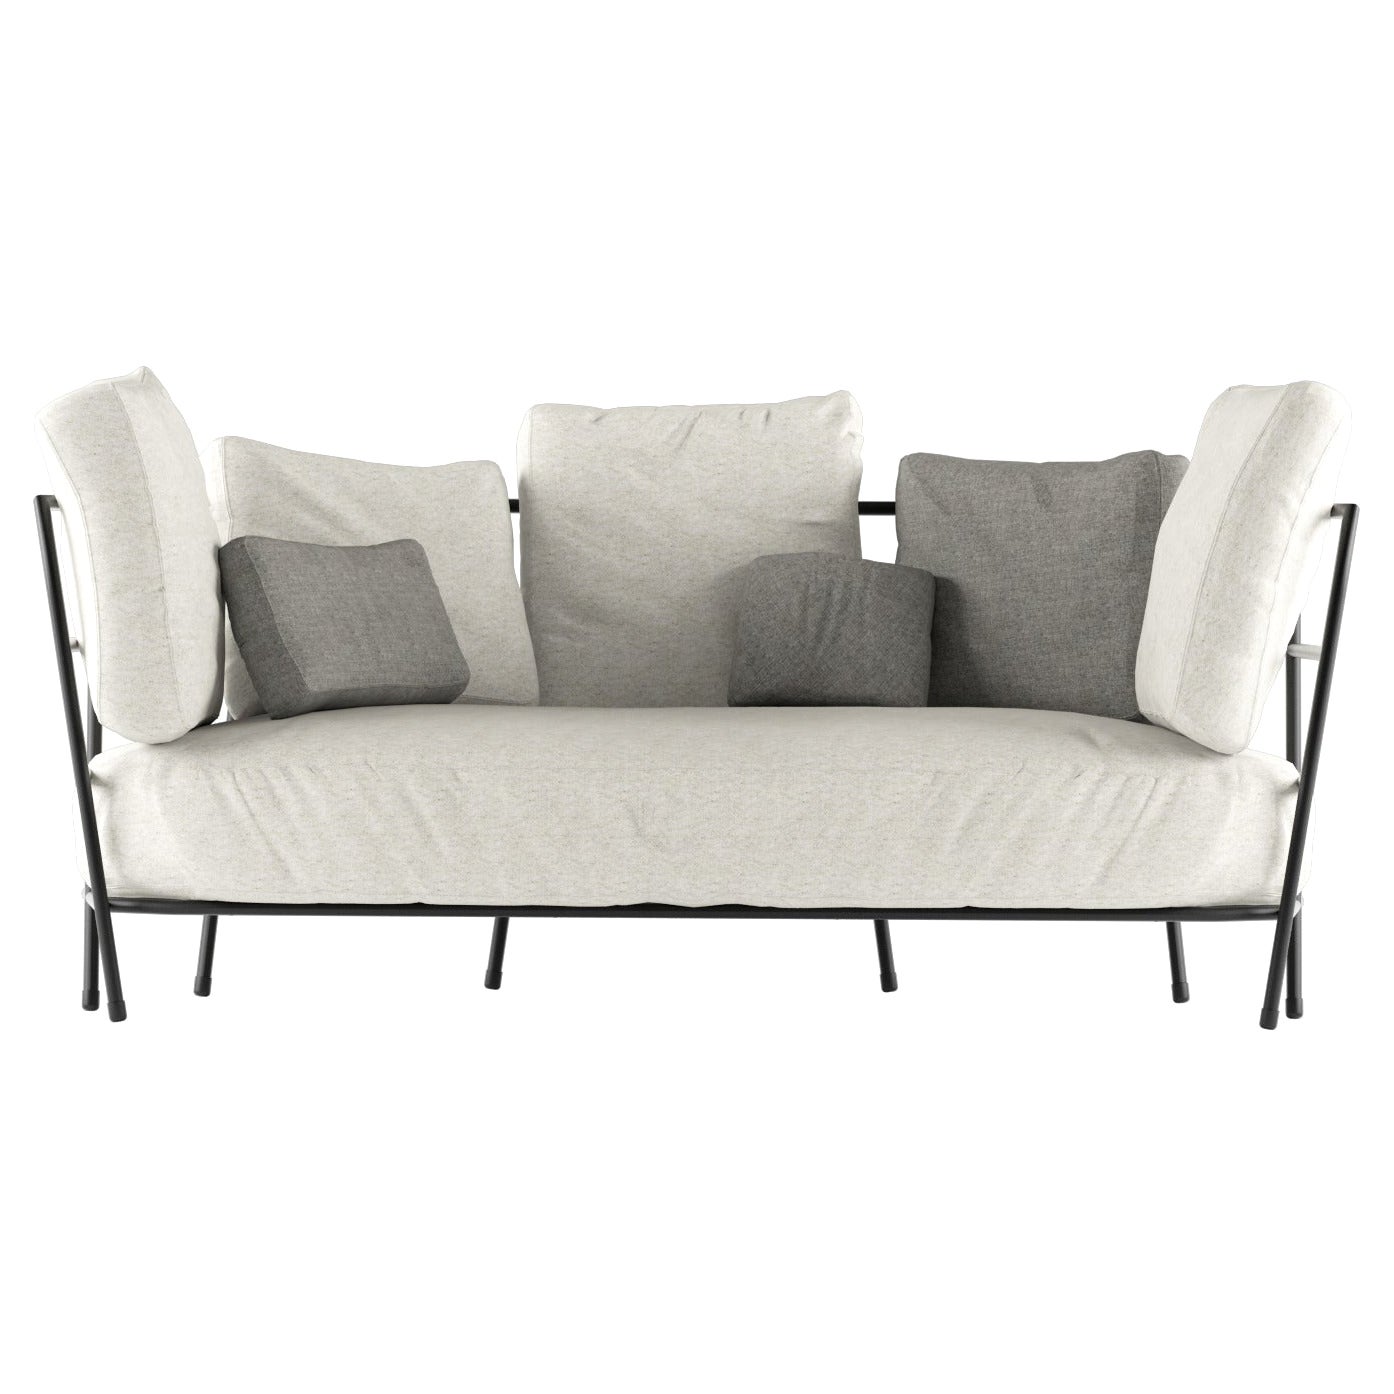 Alias 372_O Dehors 3 Seater Sofa in Light Grey Seat with Black Lacquered Frame